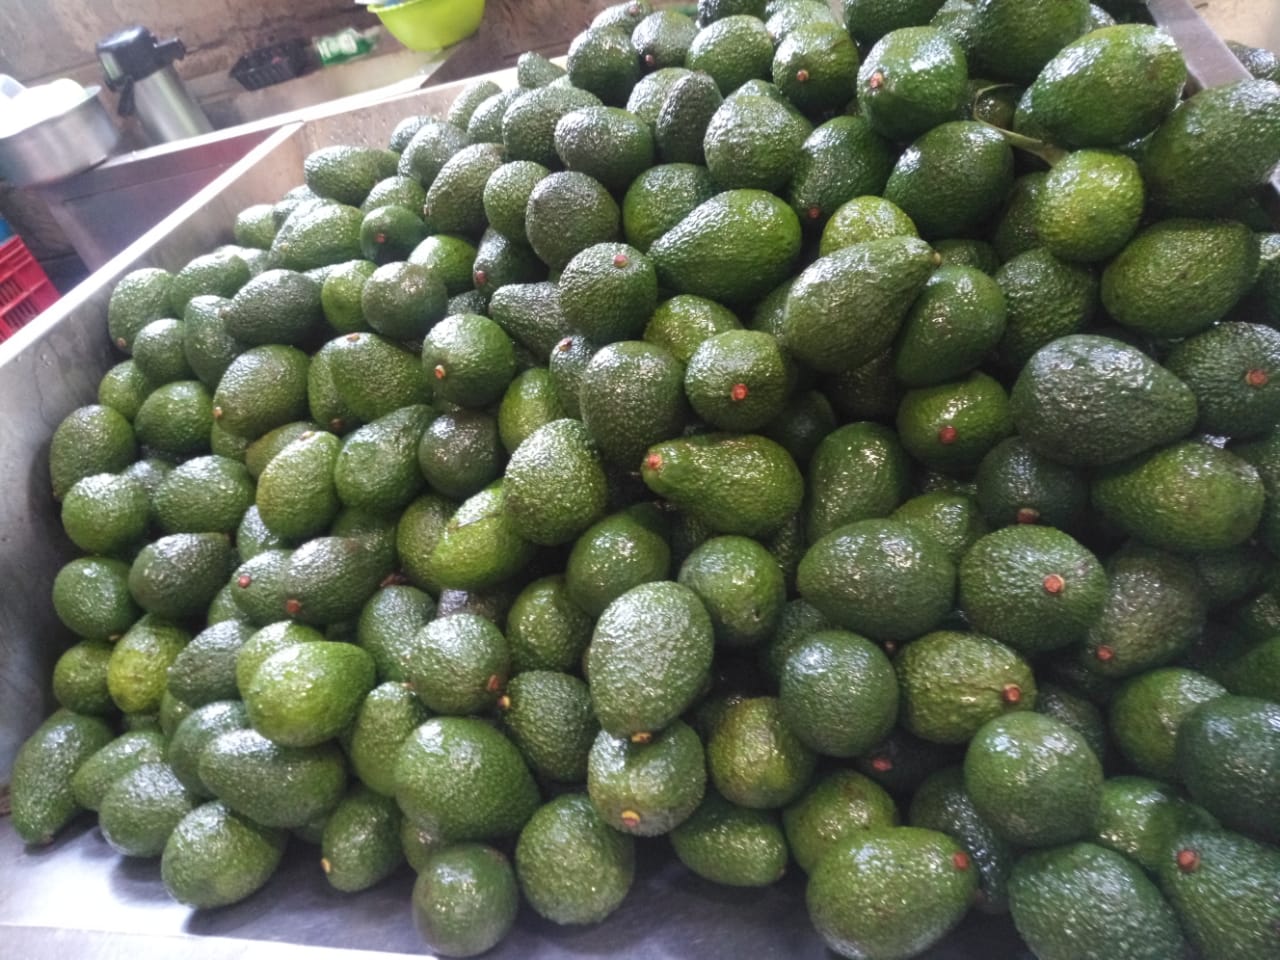 Product image - ORGANIC HASS AVOCADOS FROM KENYA

Season: March till September.

FOB: 1.55 USD/kg.

Certificate: GLOBALG.A.P.

The fruits are transported in 40 ft freezer containers. The MOQ is 50 MT. 

Send me an invitation if you are interested in buying avocados, including an LOI to get started.

Thank you!
